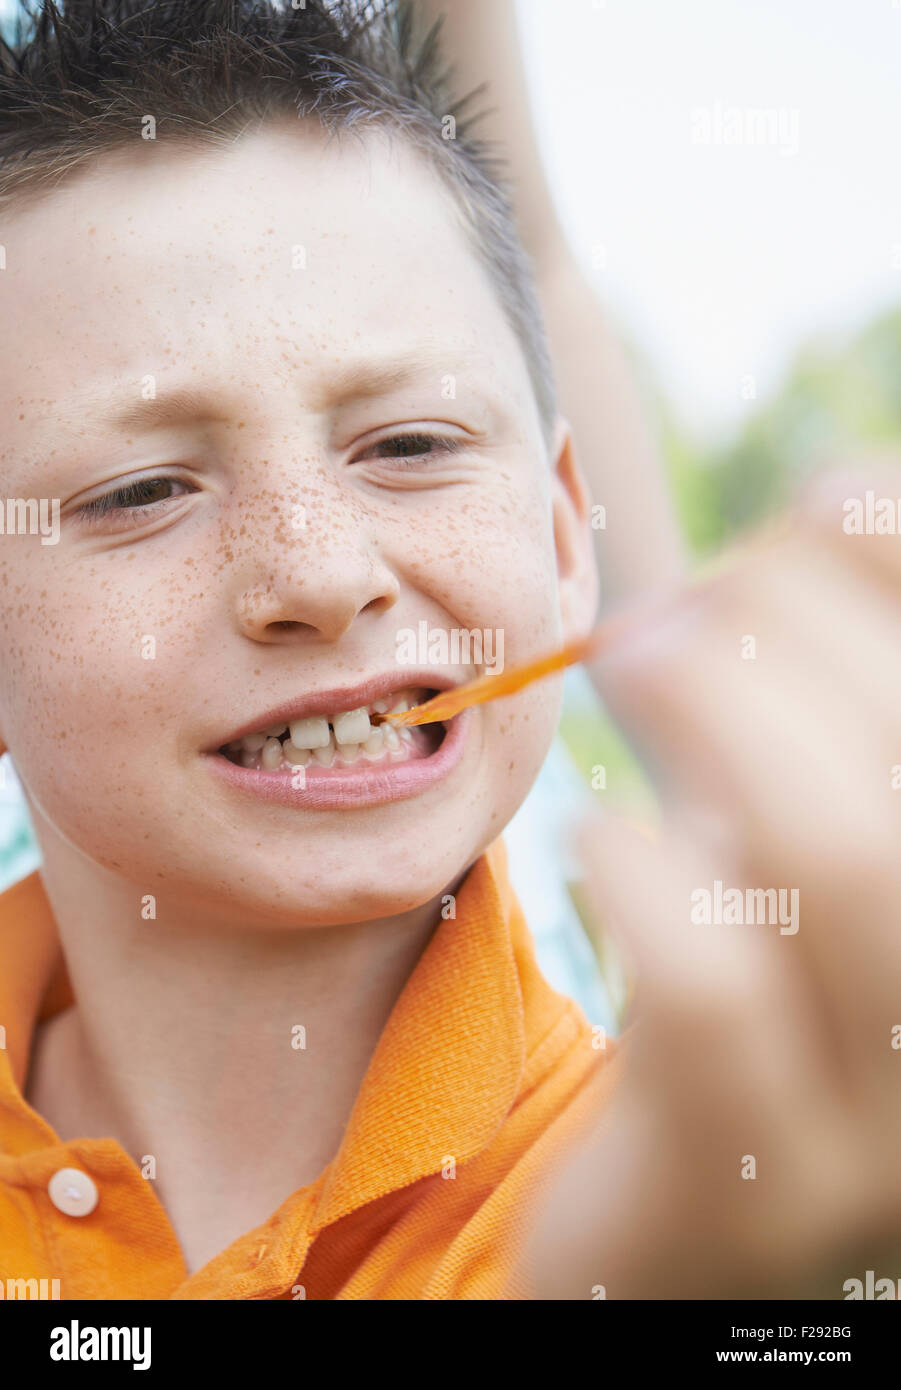 Boy pulling bubble gum out of his mouth, Bavaria, Germany Stock Photo